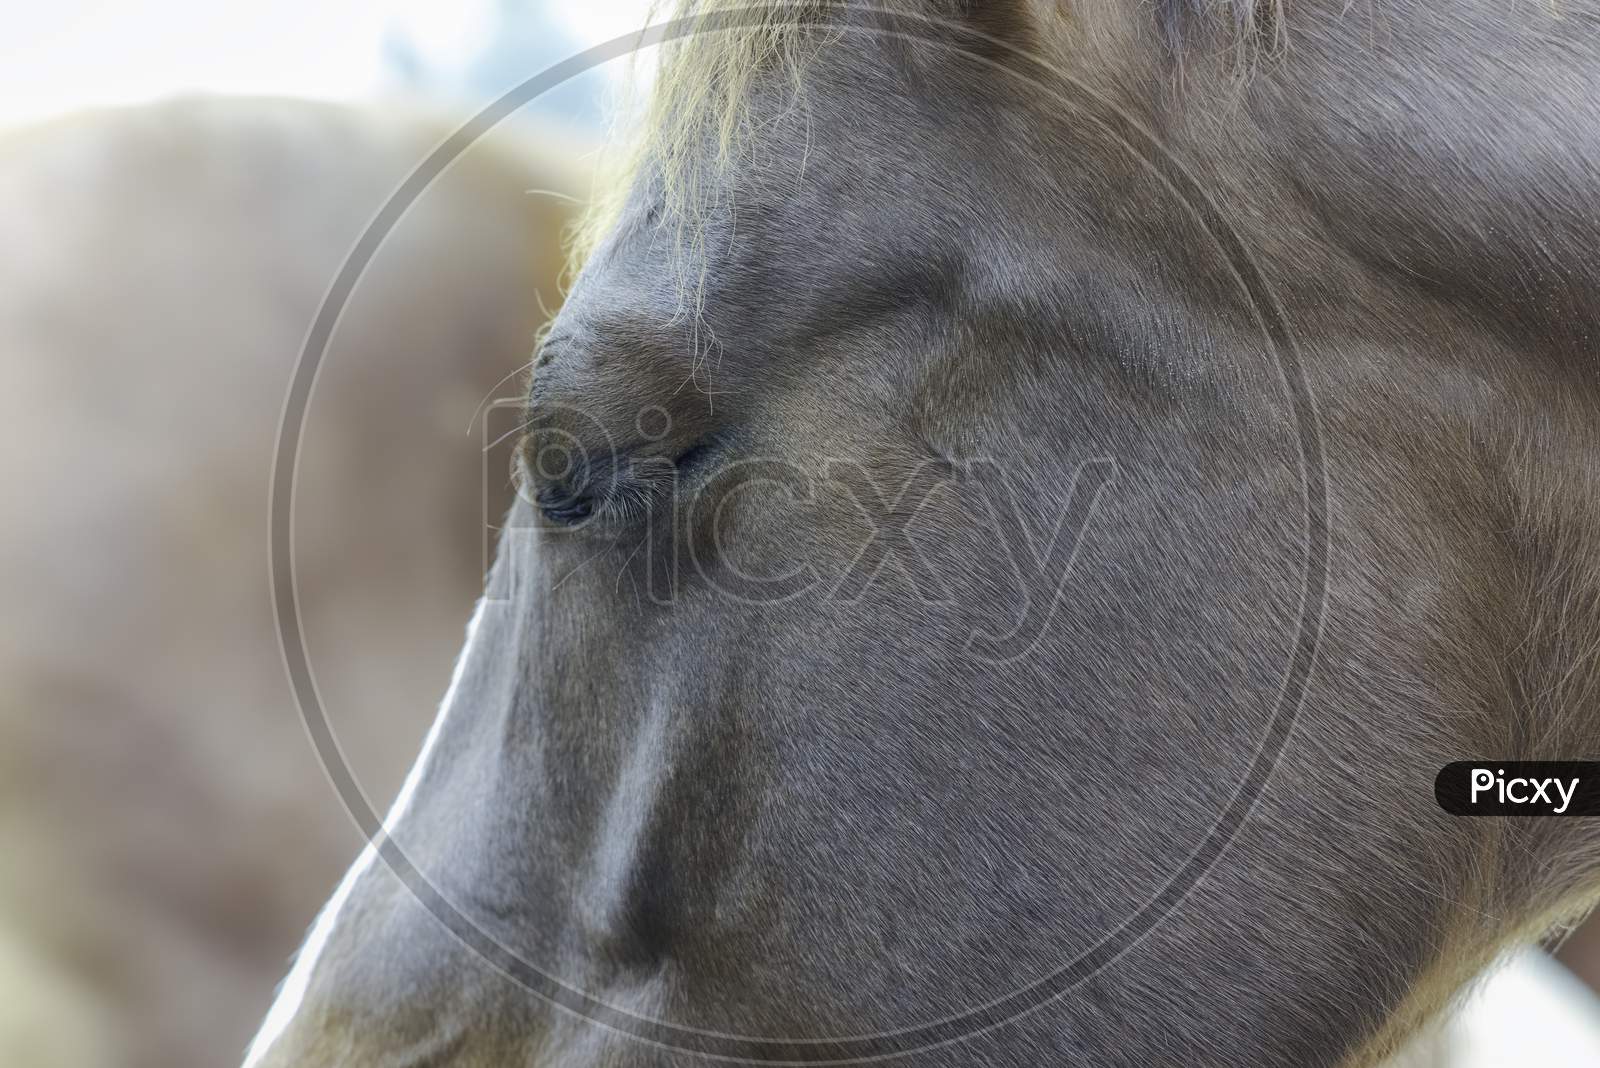 Close-Up, Left Side Of Horse Head. Horse Has Eye Closed.